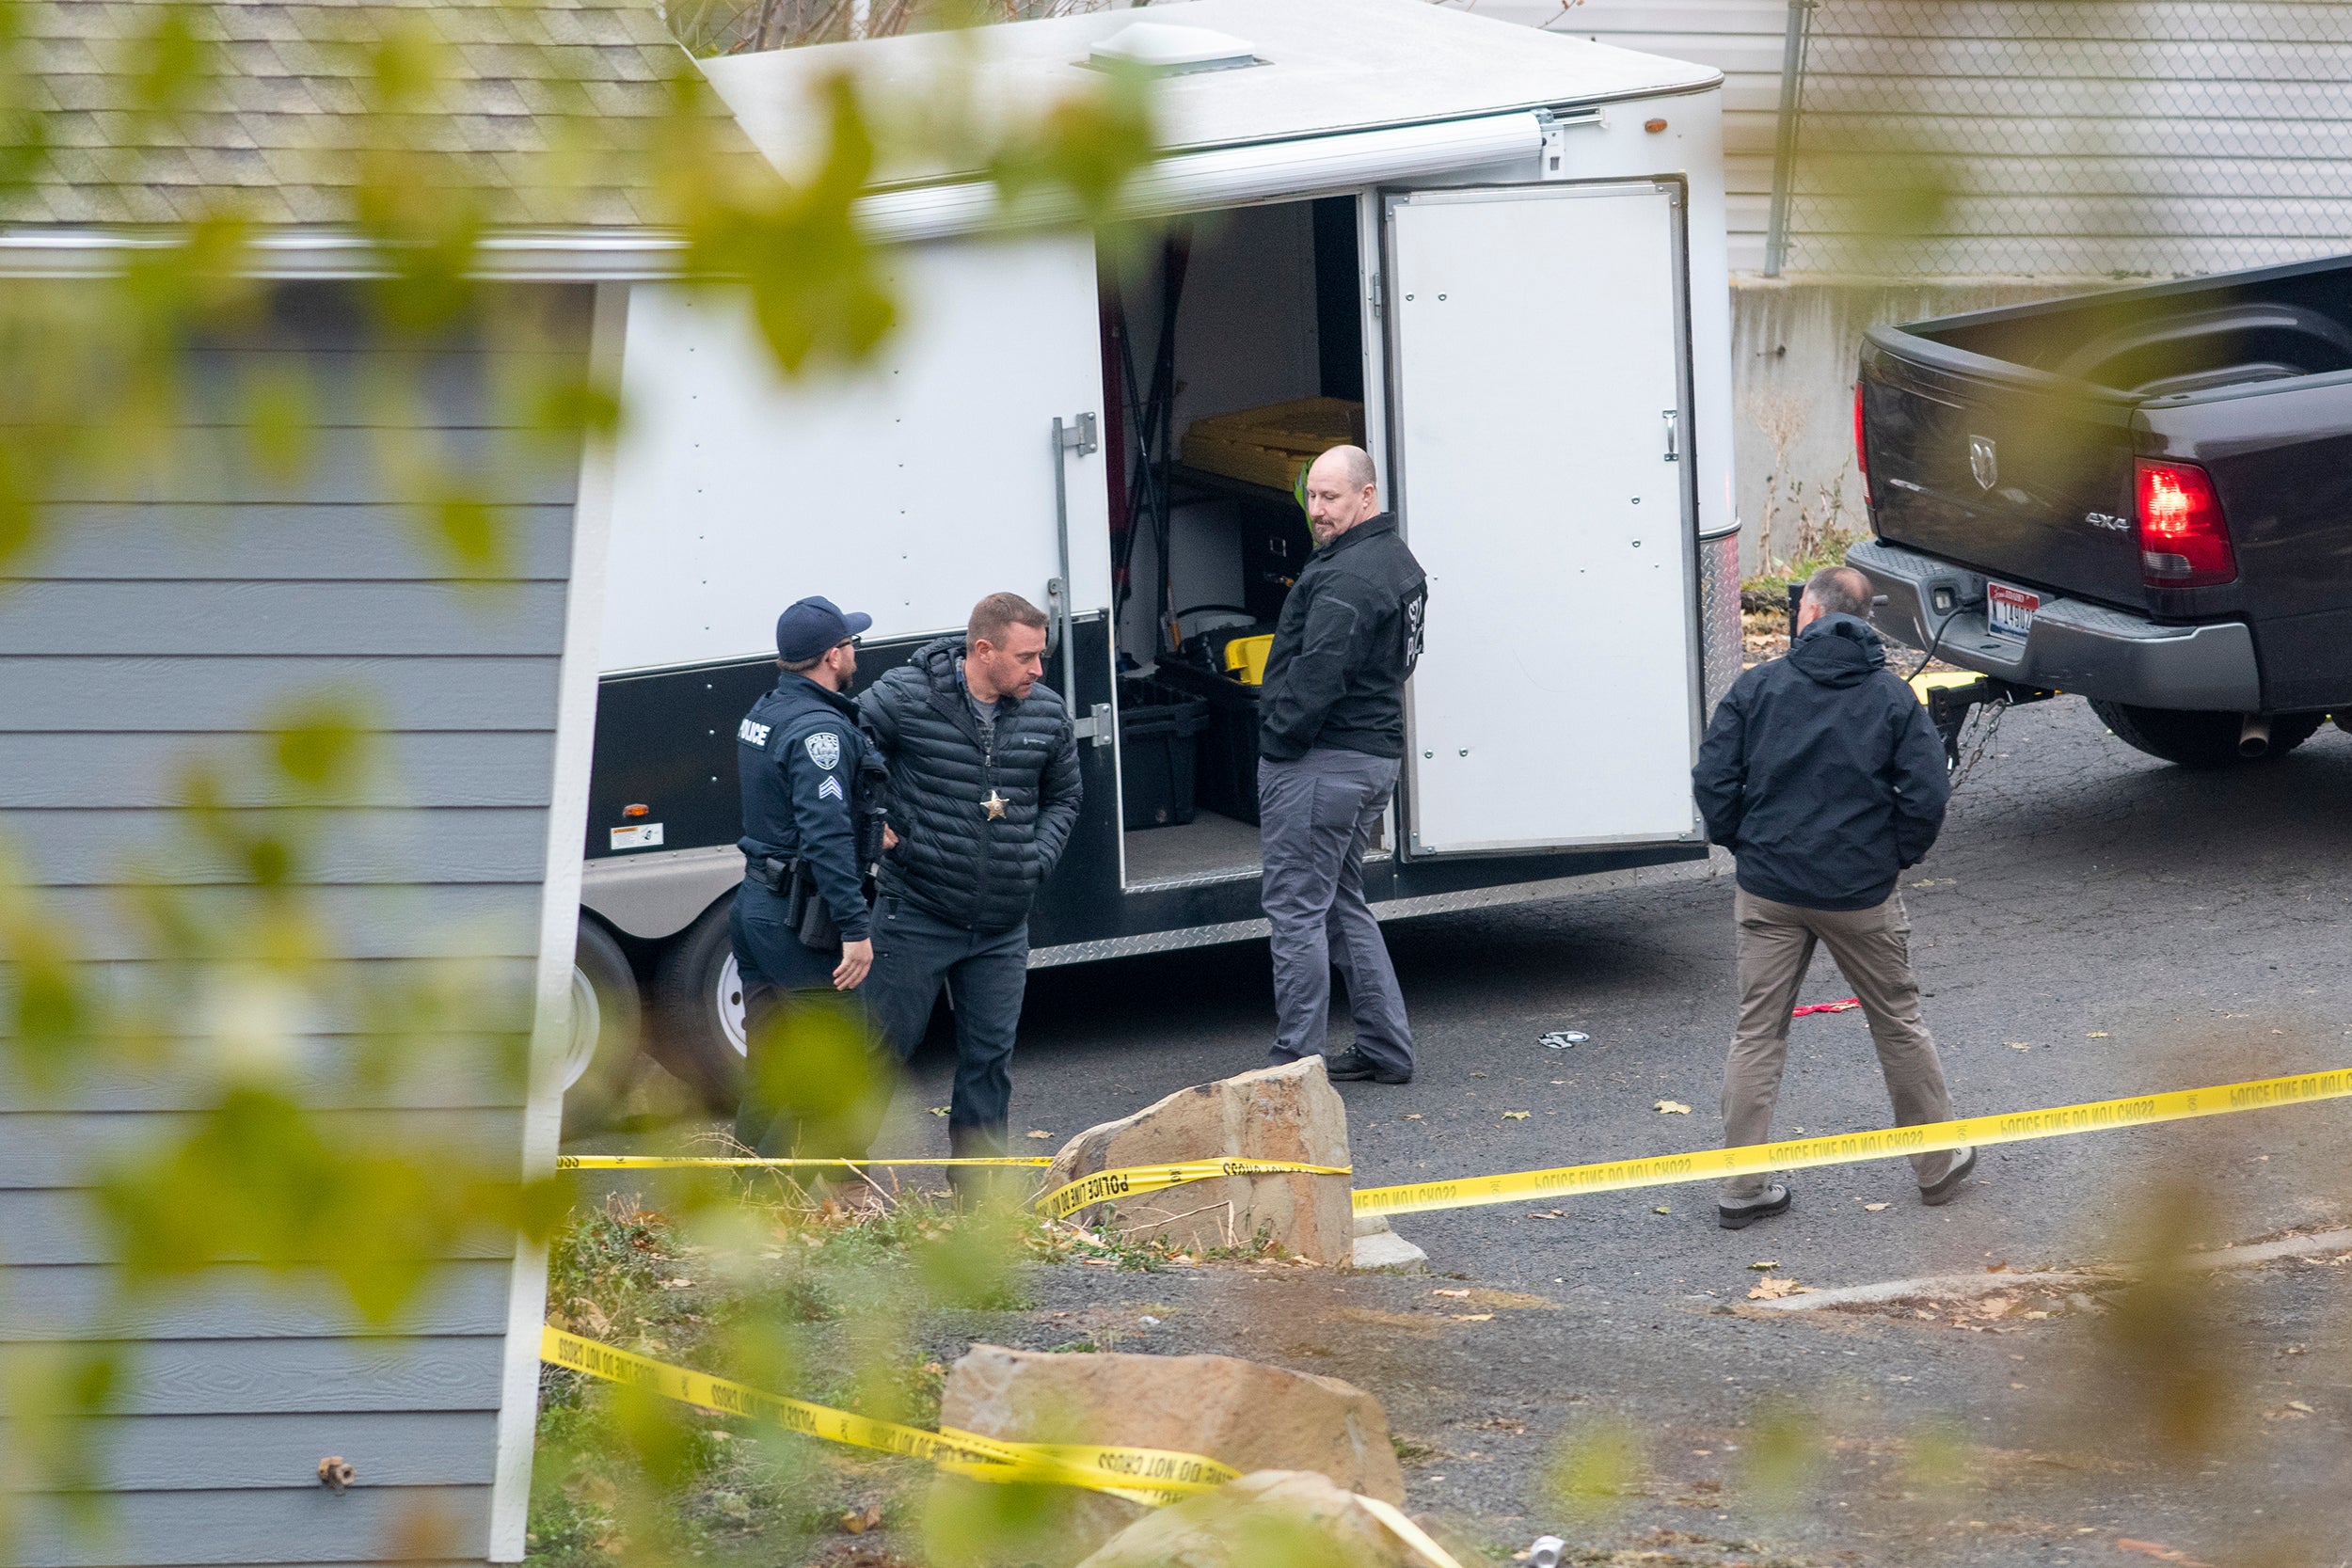 Police officers on the scene of the quadruple murders in Moscow, Idaho